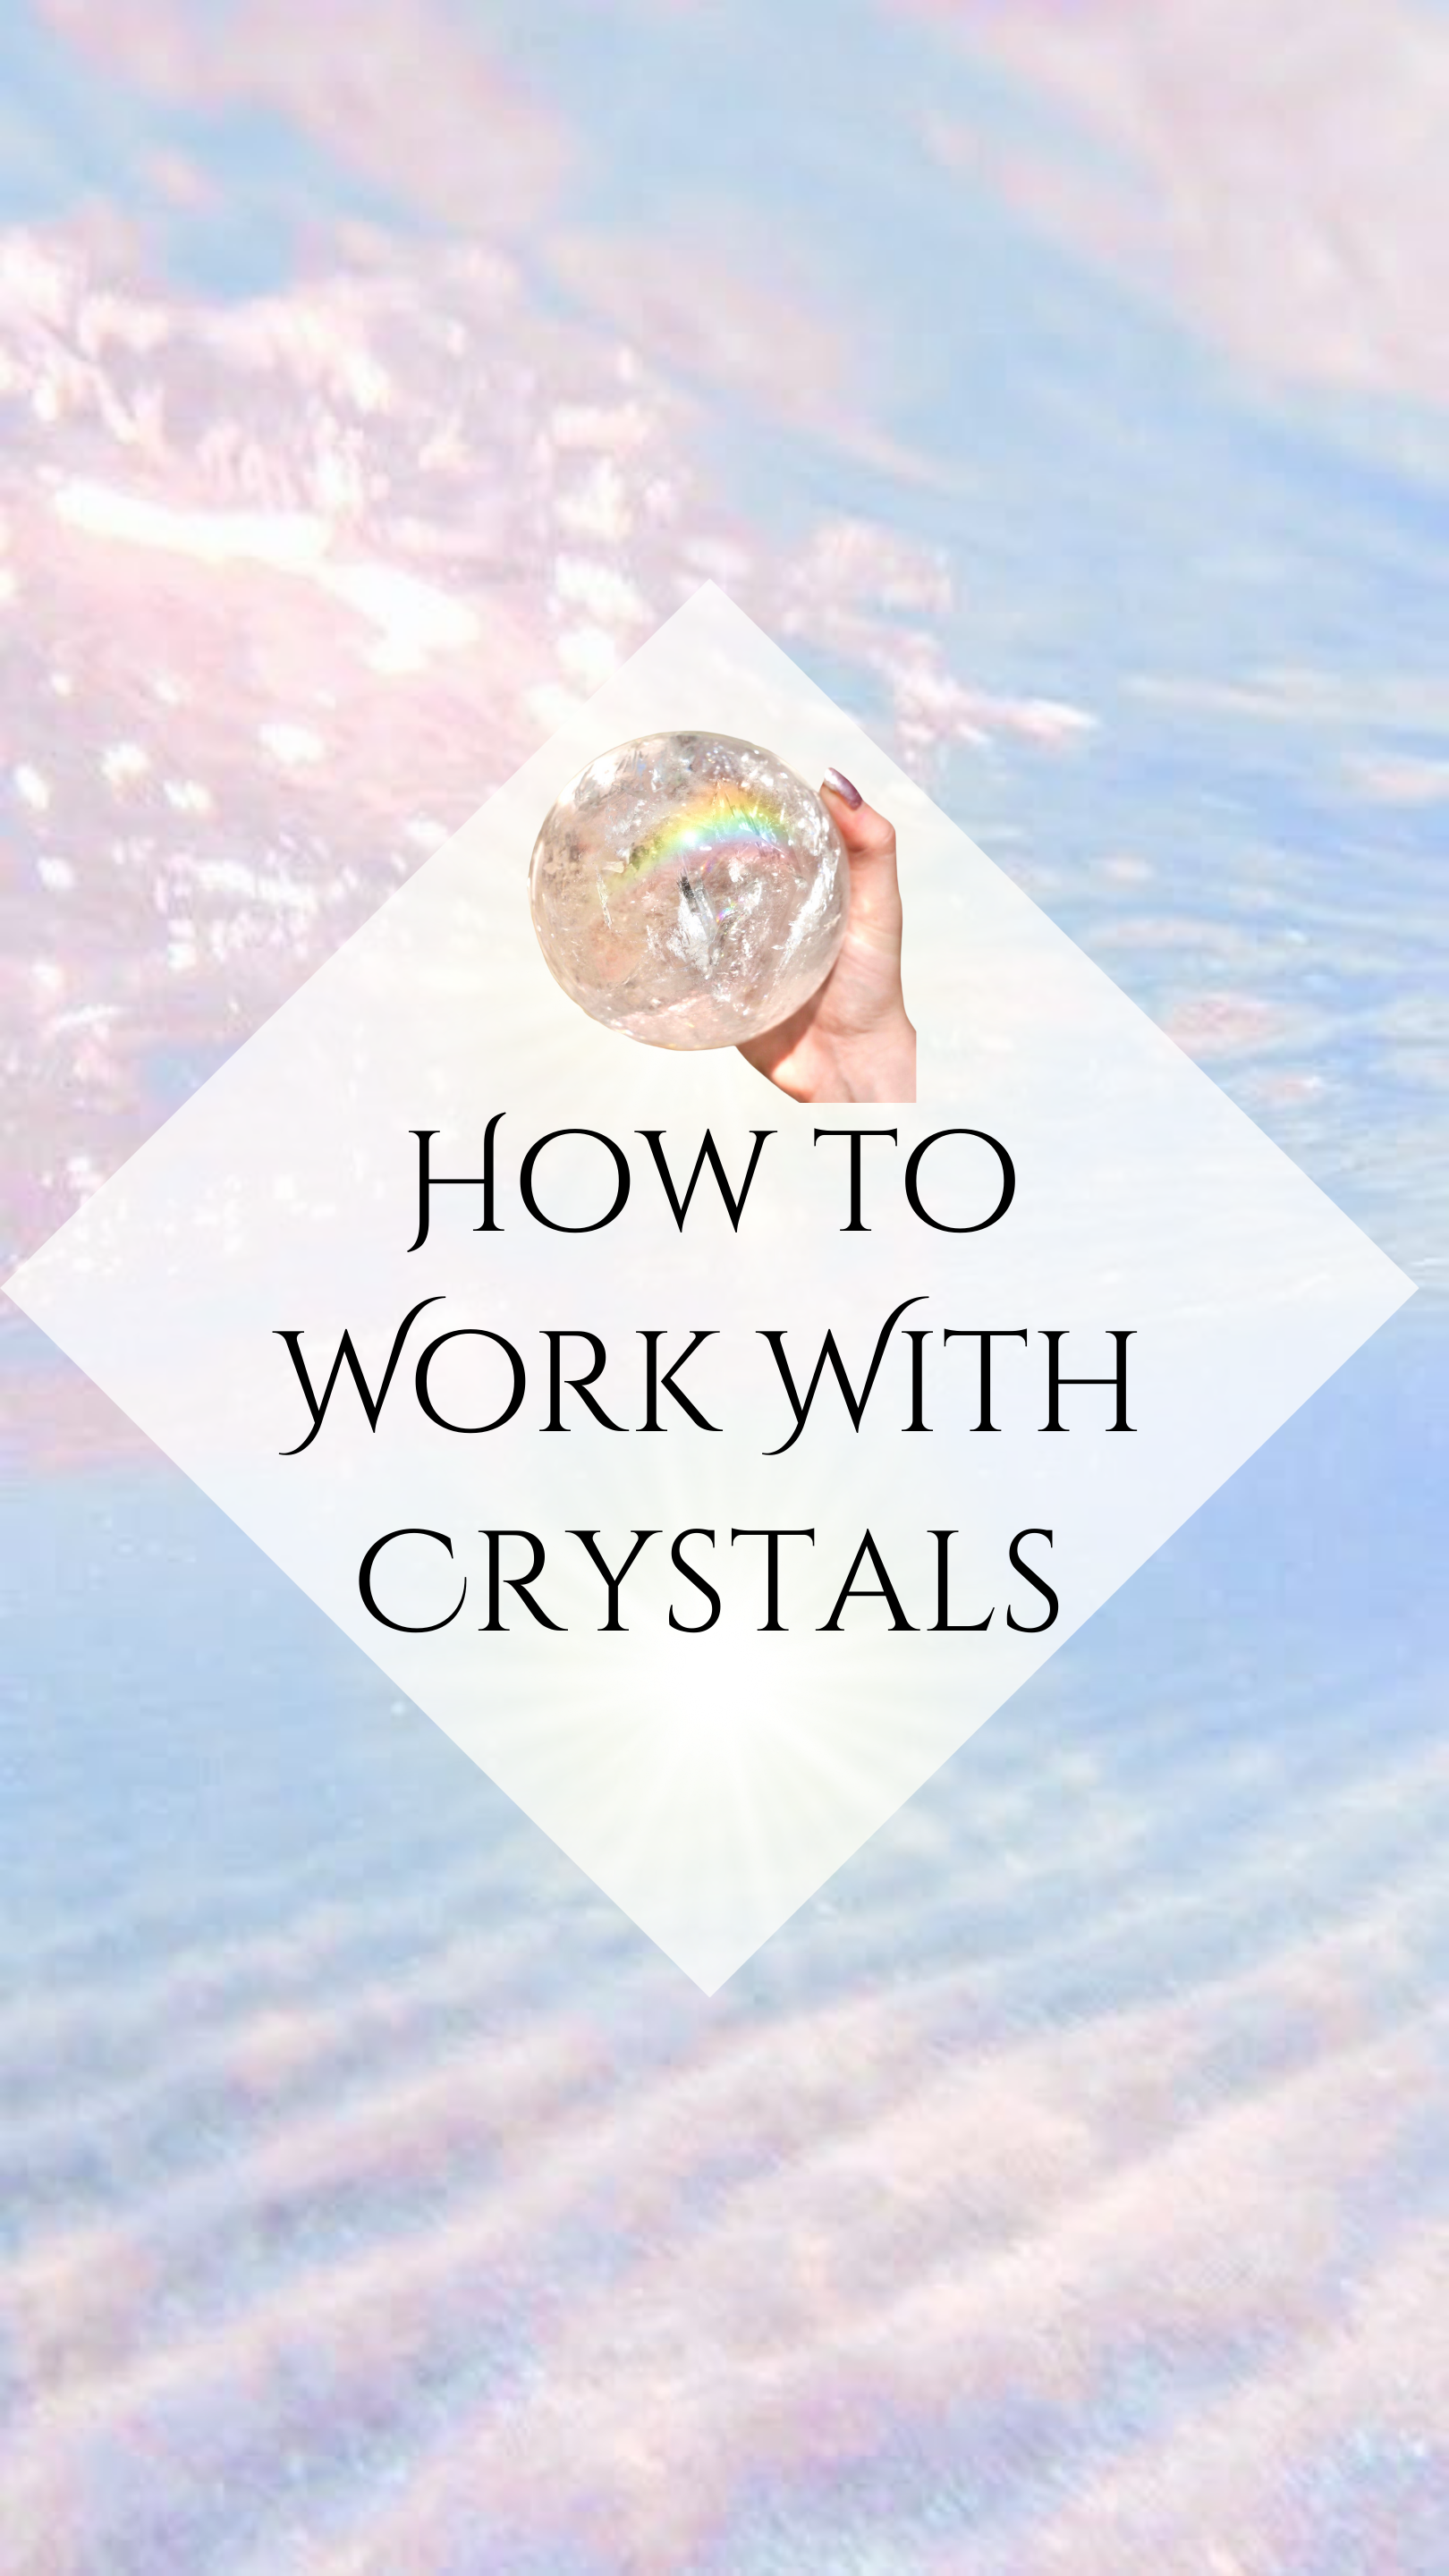 How to Work With Crystals